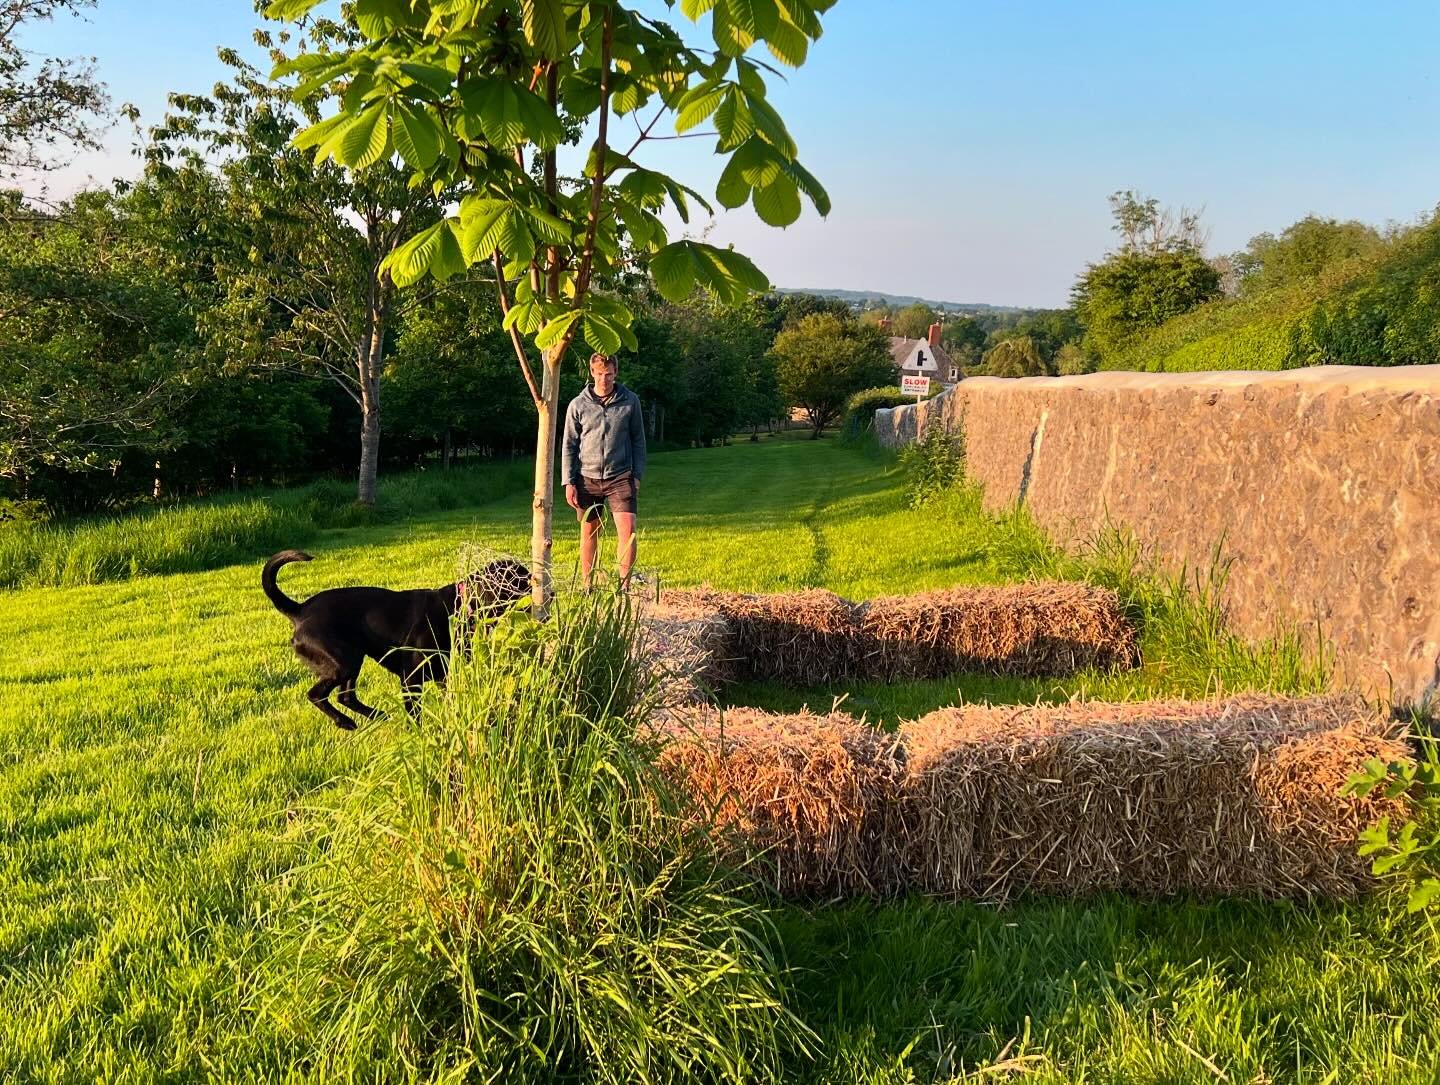 Making use of our bales creating a boundary for a seen retrieve up a rise. On the first attempt the dogs were rather surprised but confidence increased and at the end everyone did well. Our lesson was rewarded with a stunning sunset to finish #gundog